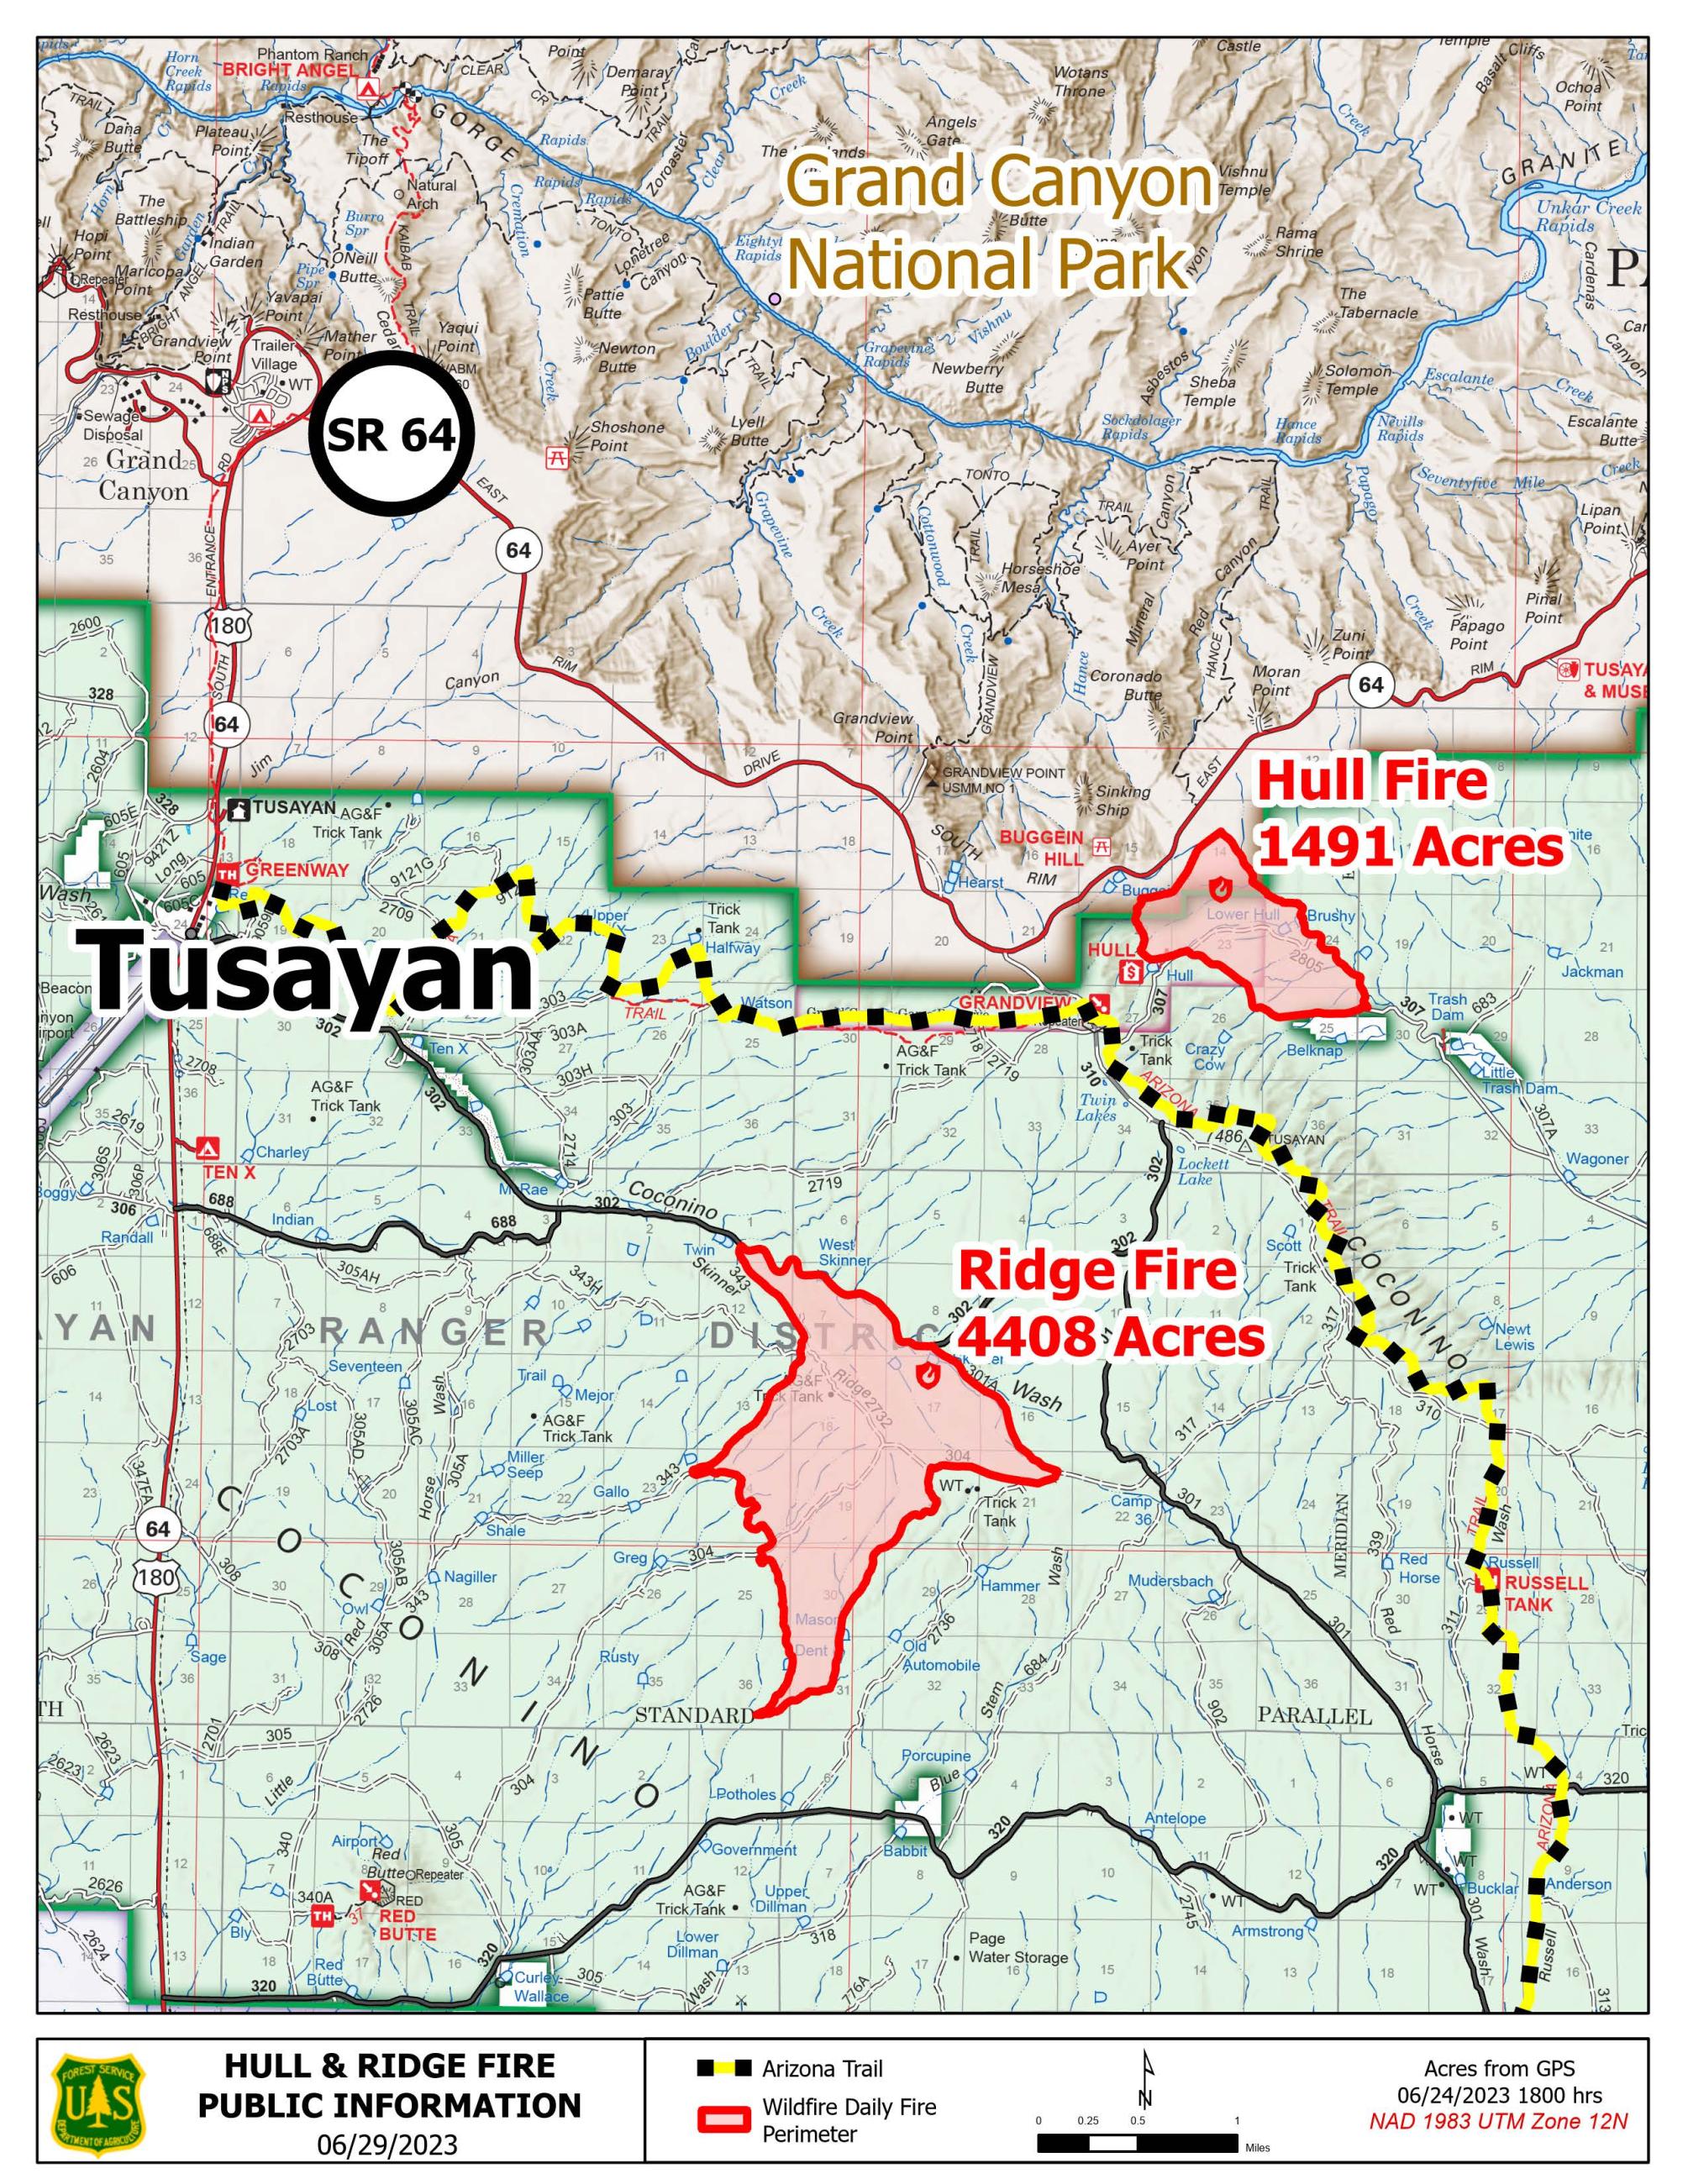 Map of the Ridge Fire area for 7/7